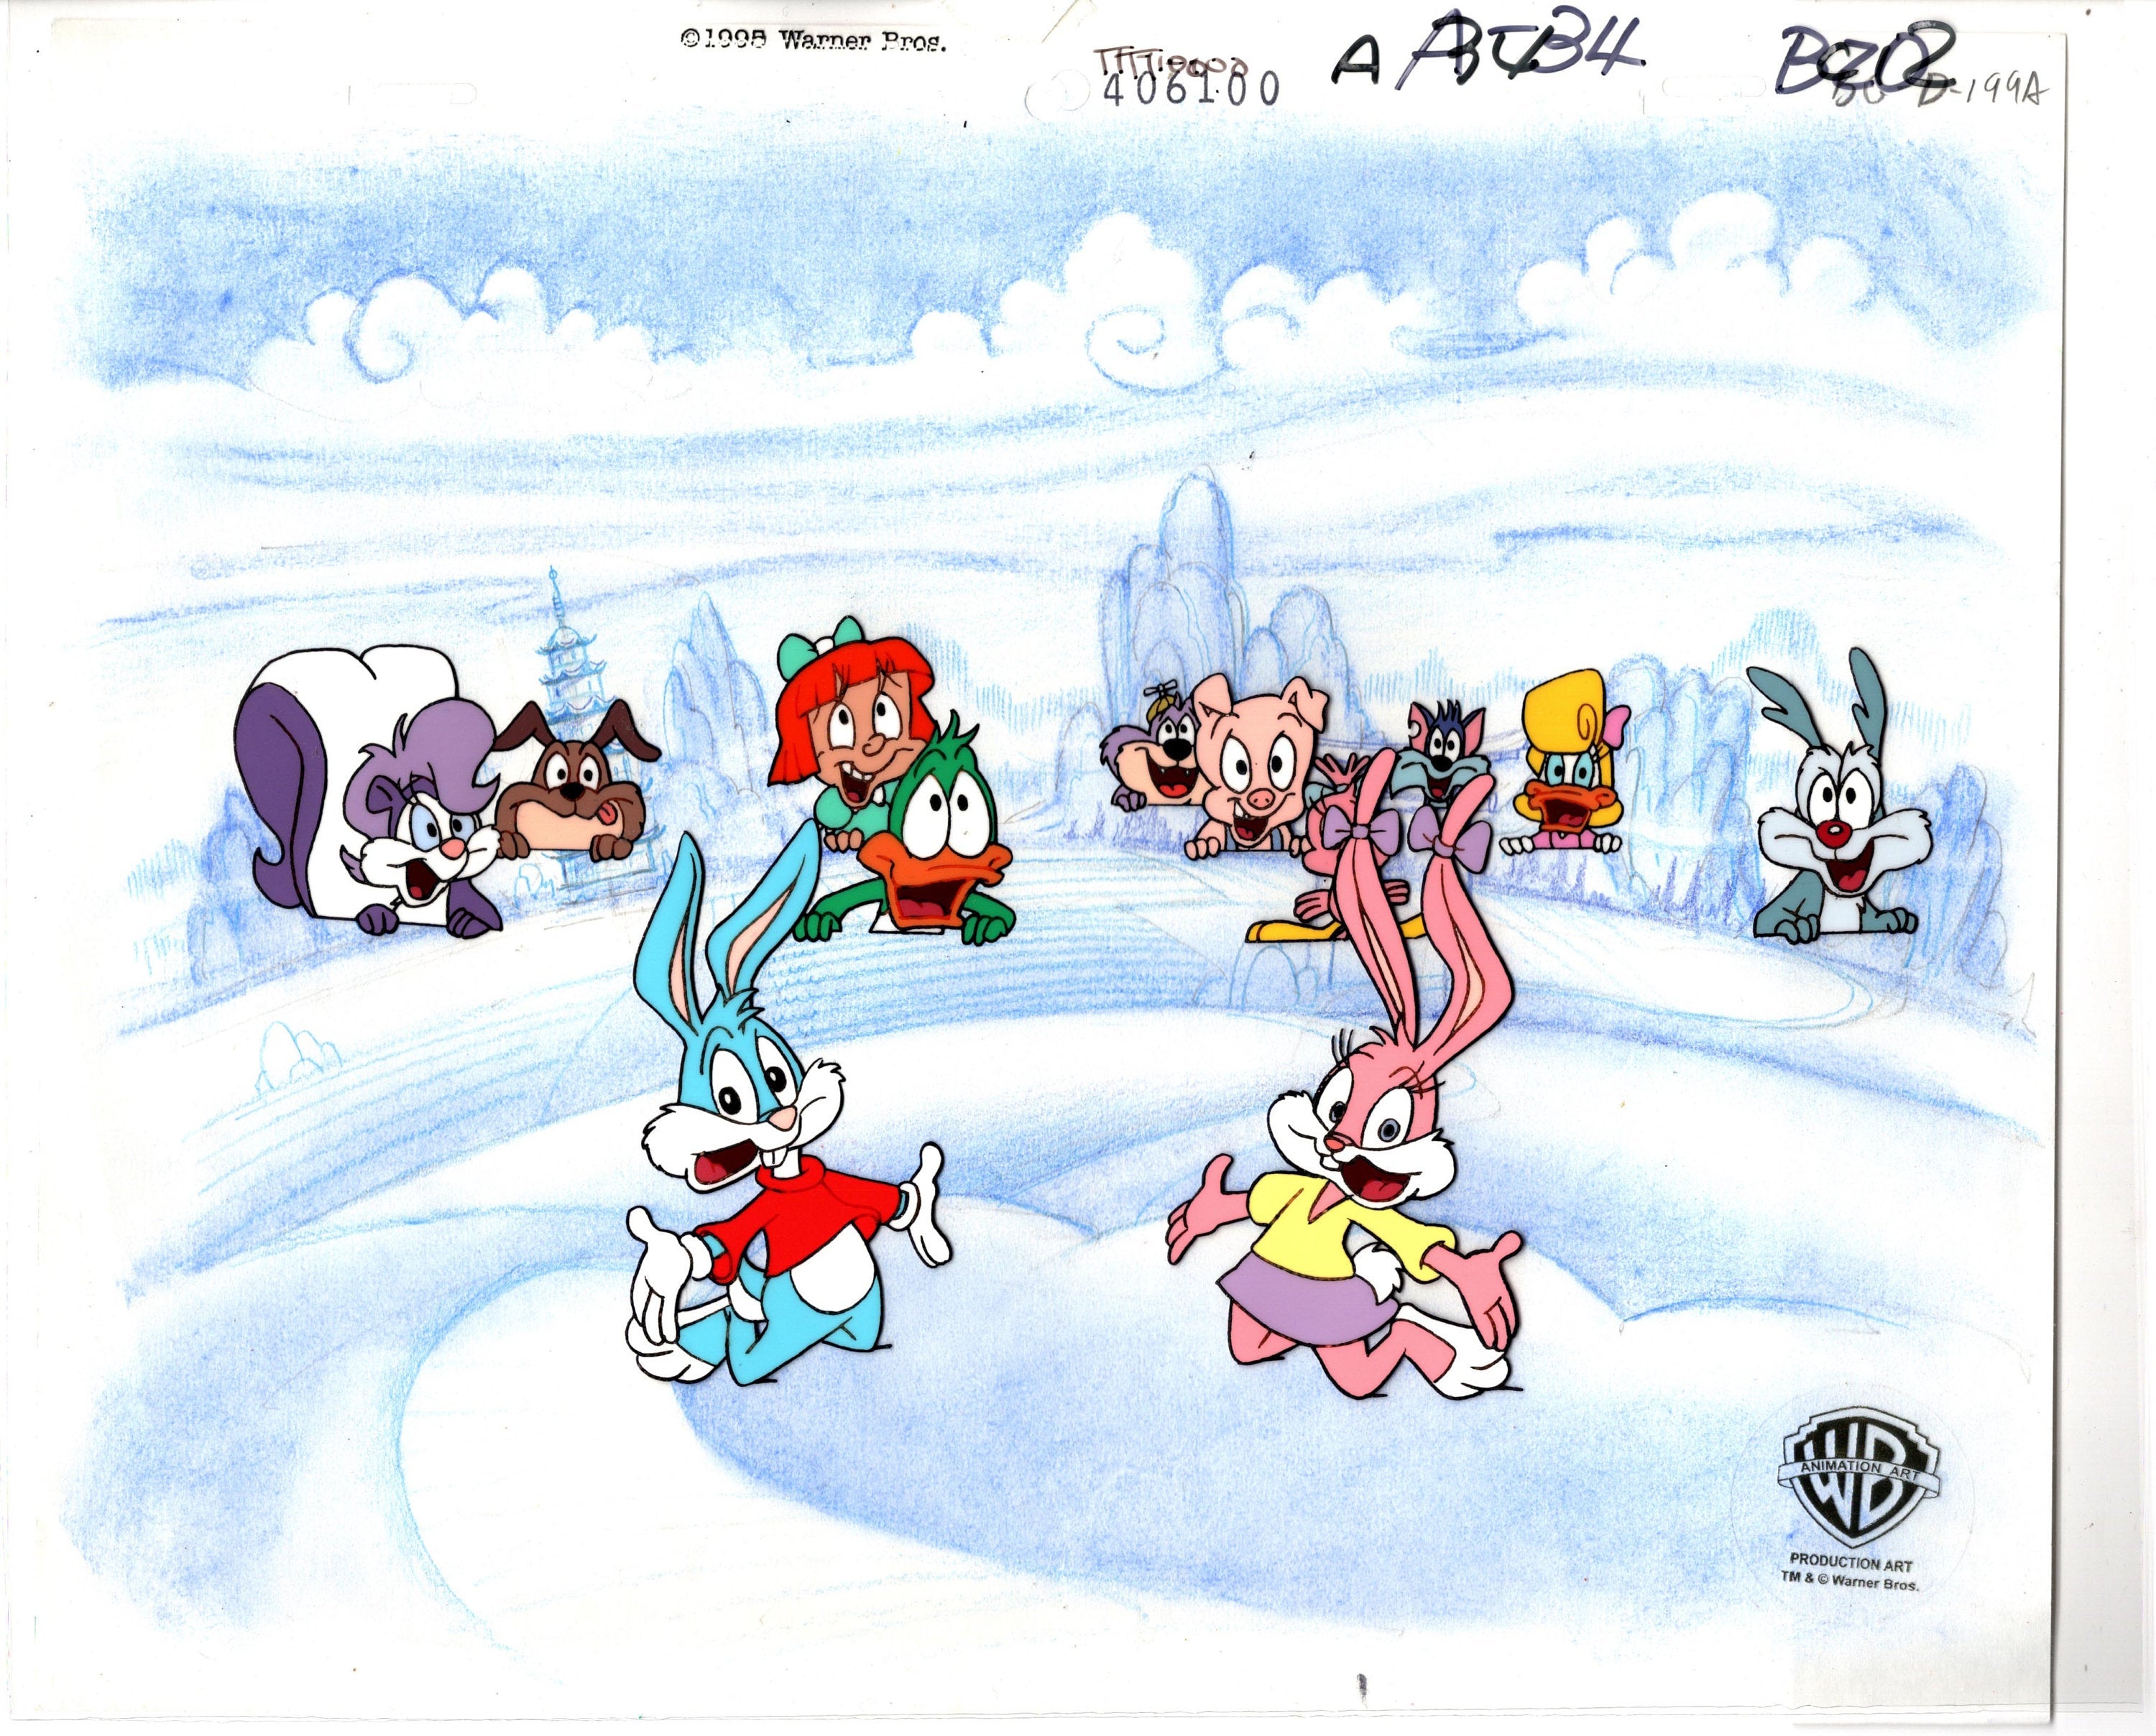 Tiny Toons Original Production Cel of Babs, Buster and 10 other